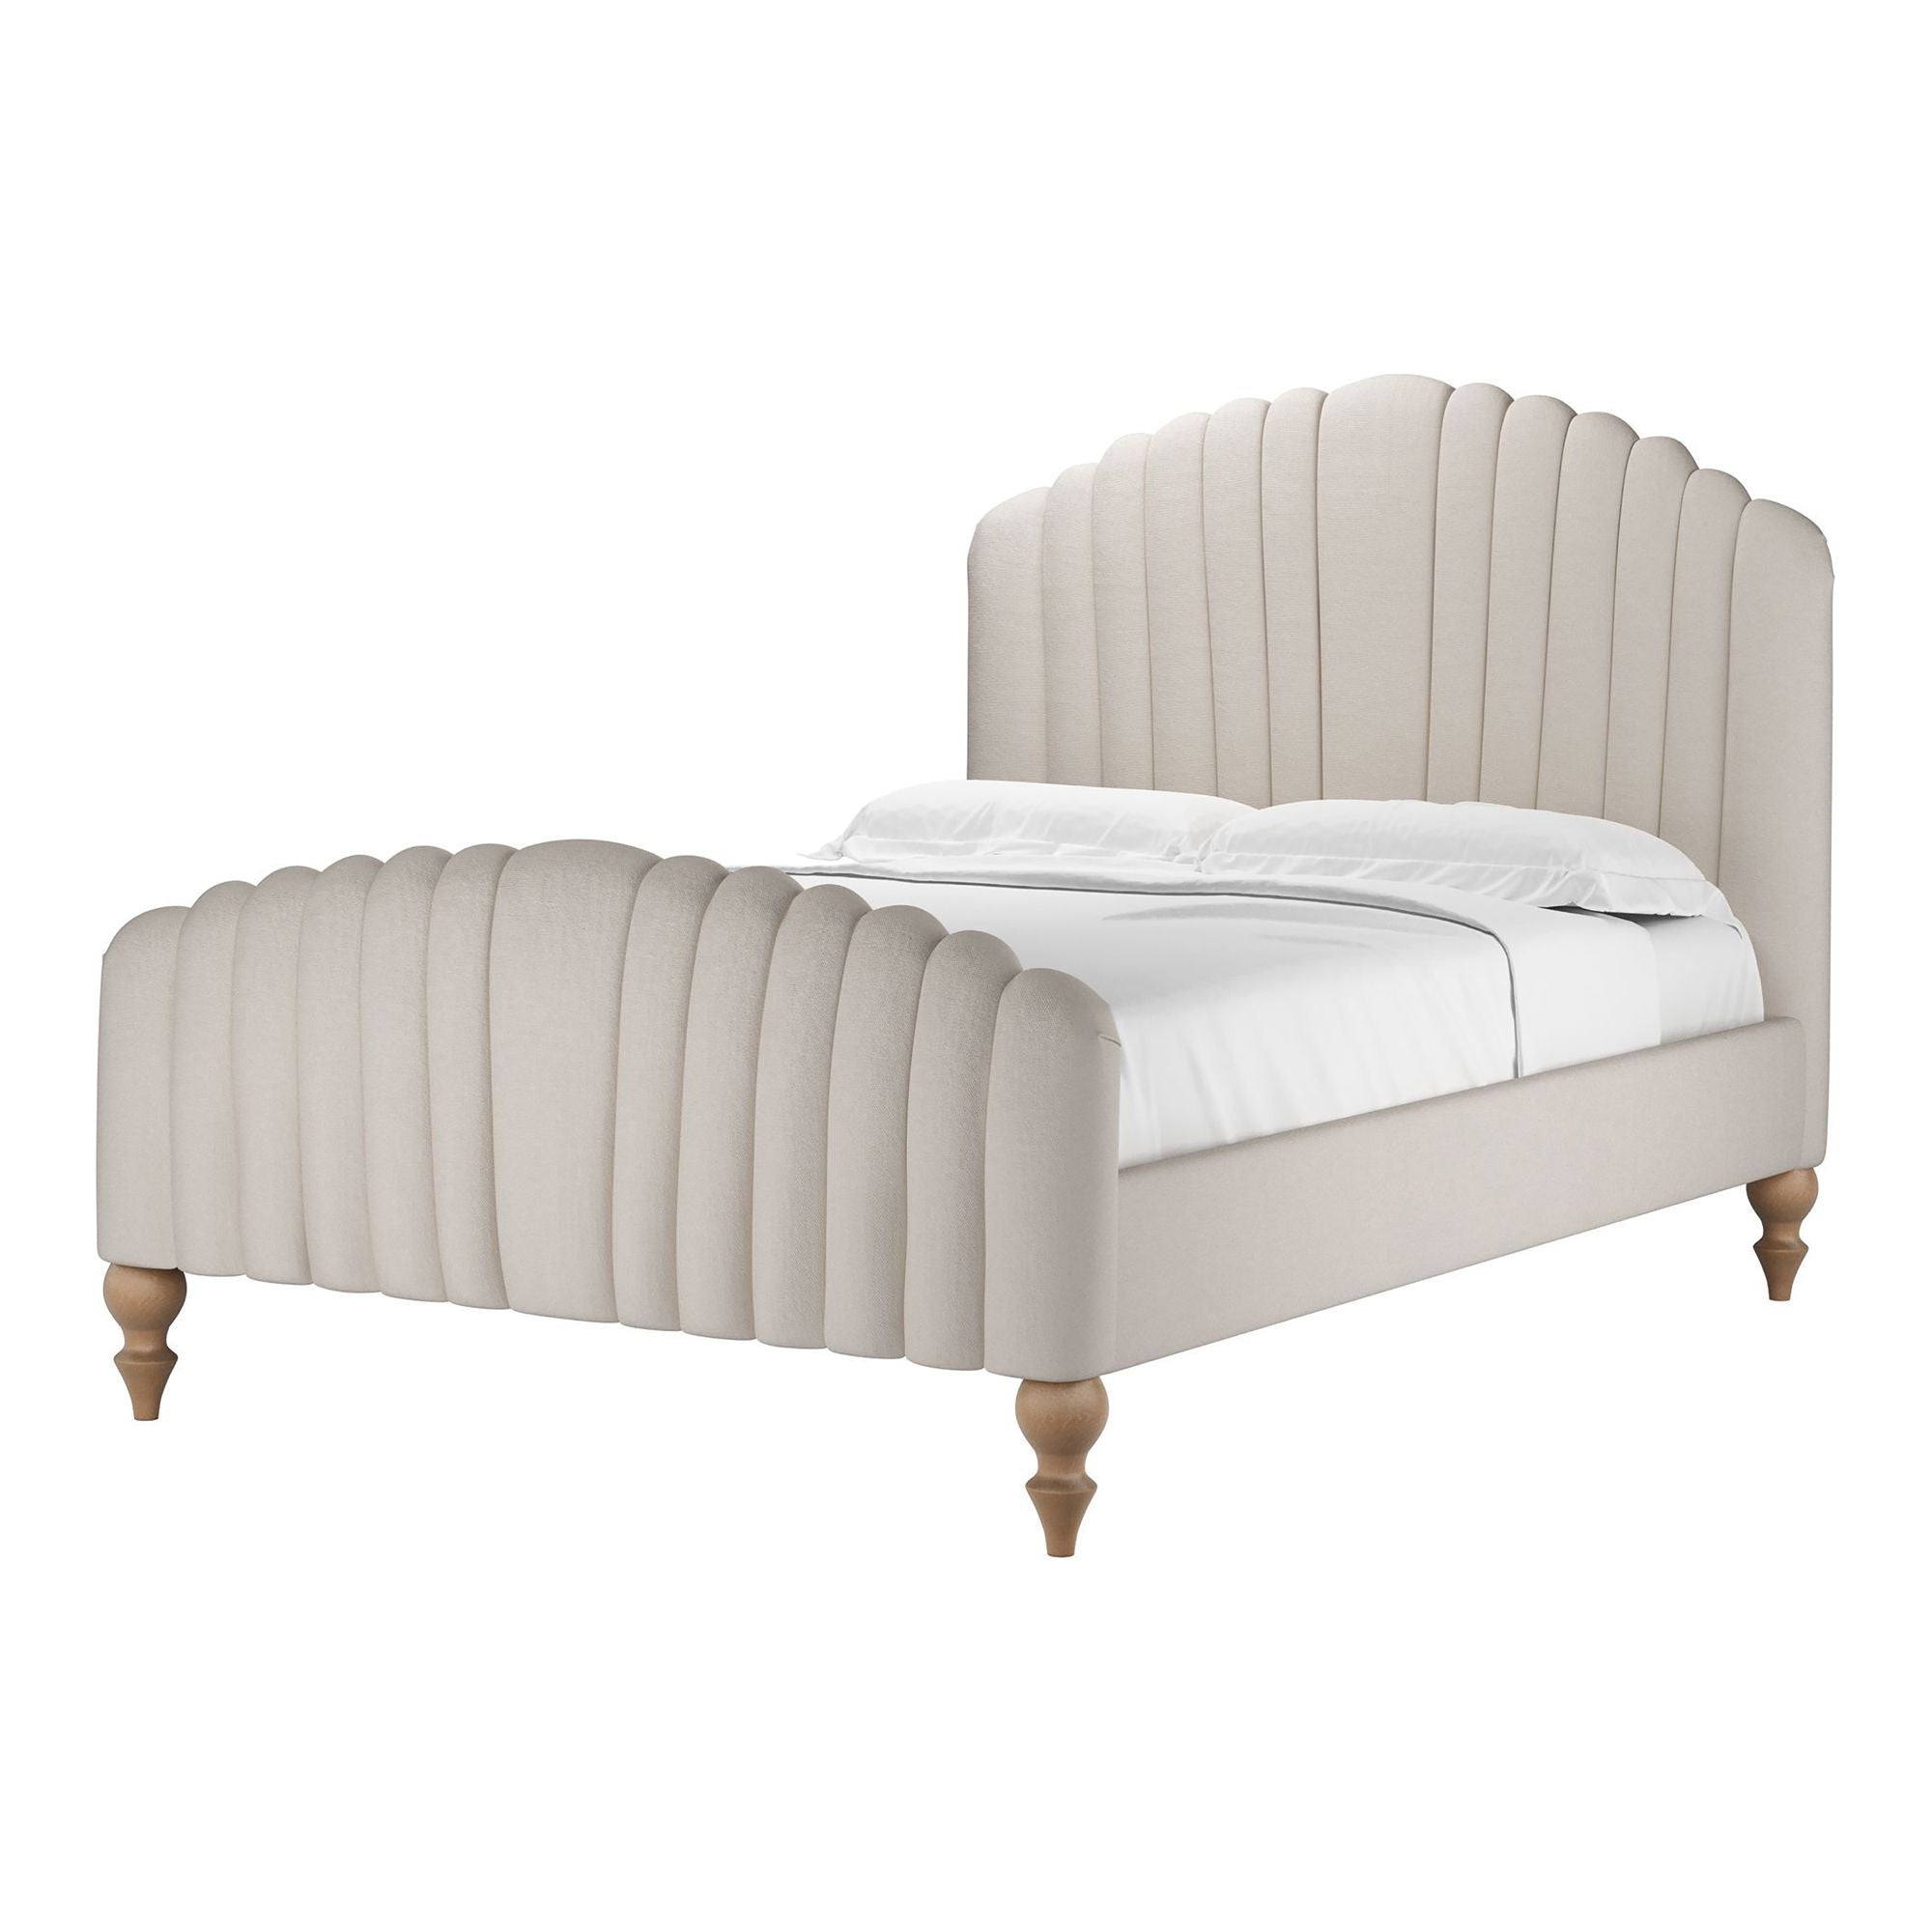 Bella Brushed Linen Cotton Bed - Double Size